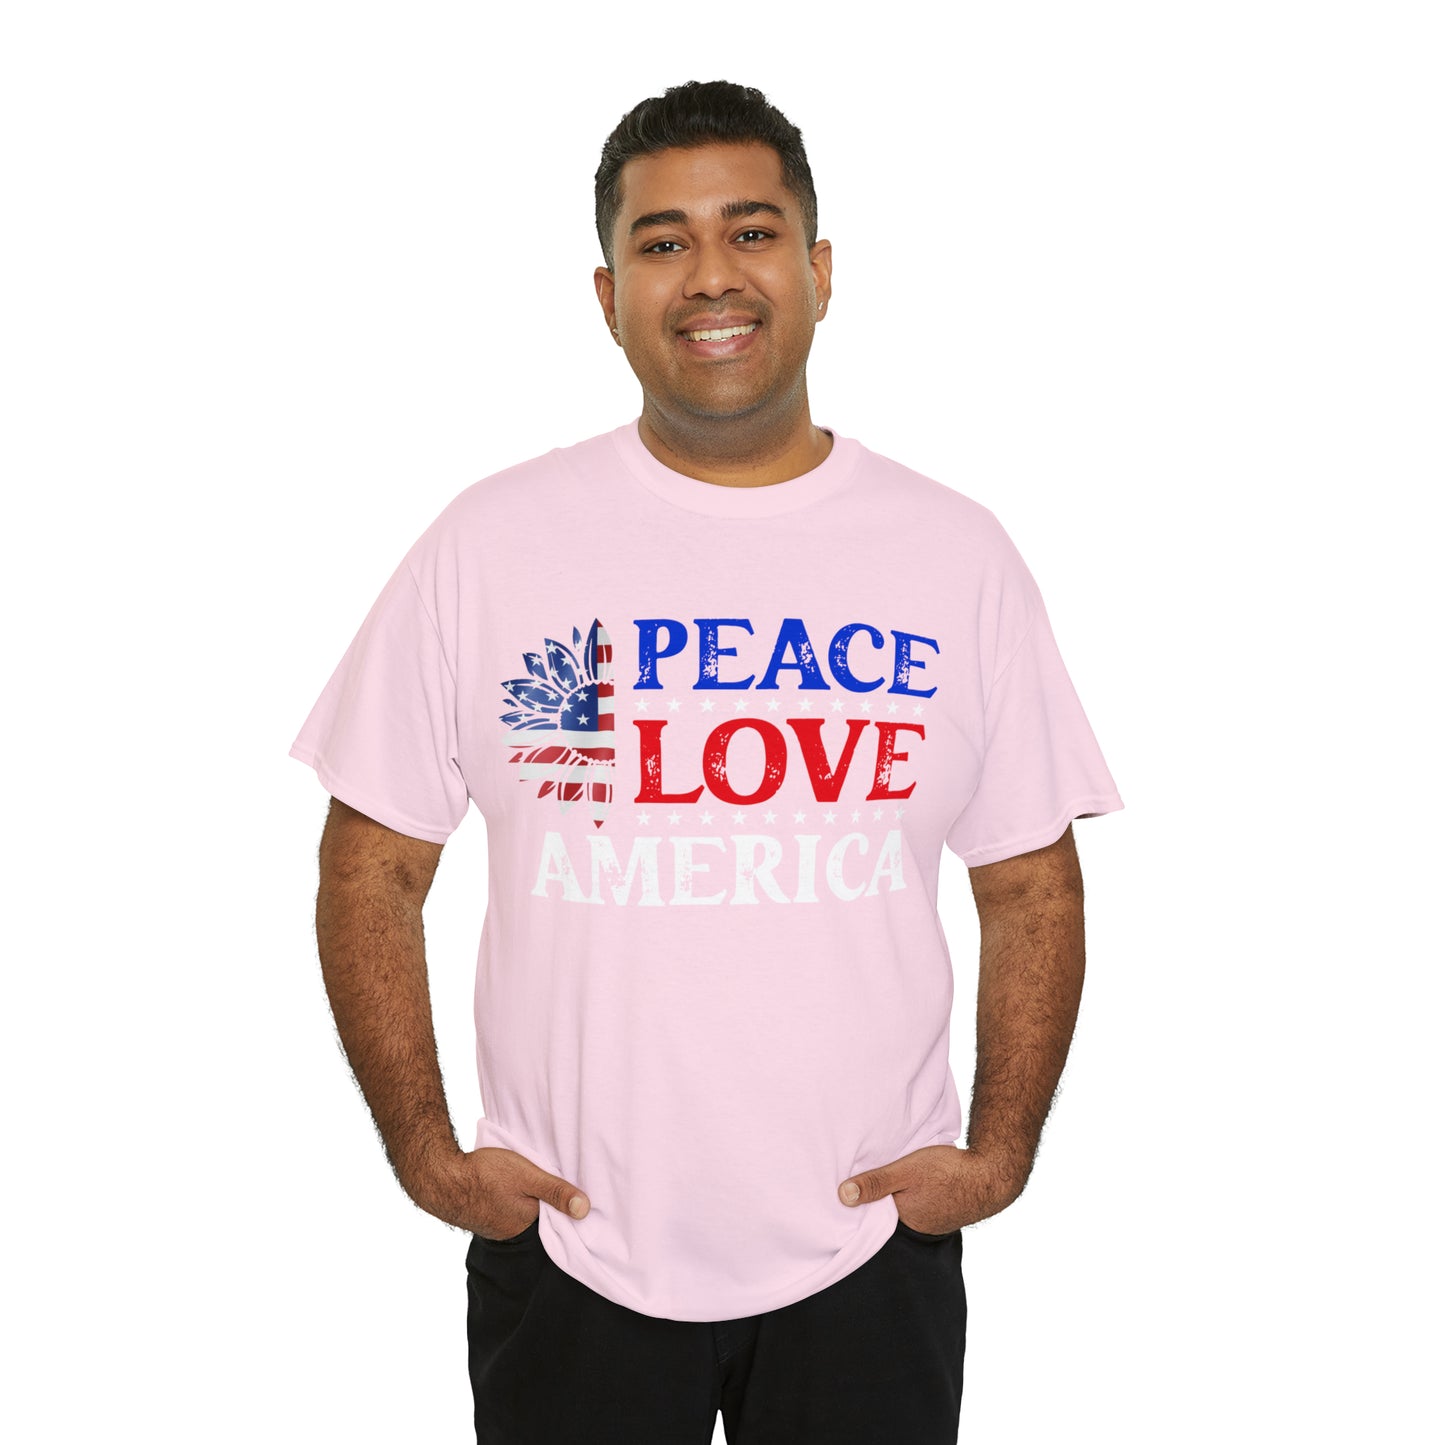 "Peace, Love, America" T-Shirt - Weave Got Gifts - Unique Gifts You Won’t Find Anywhere Else!